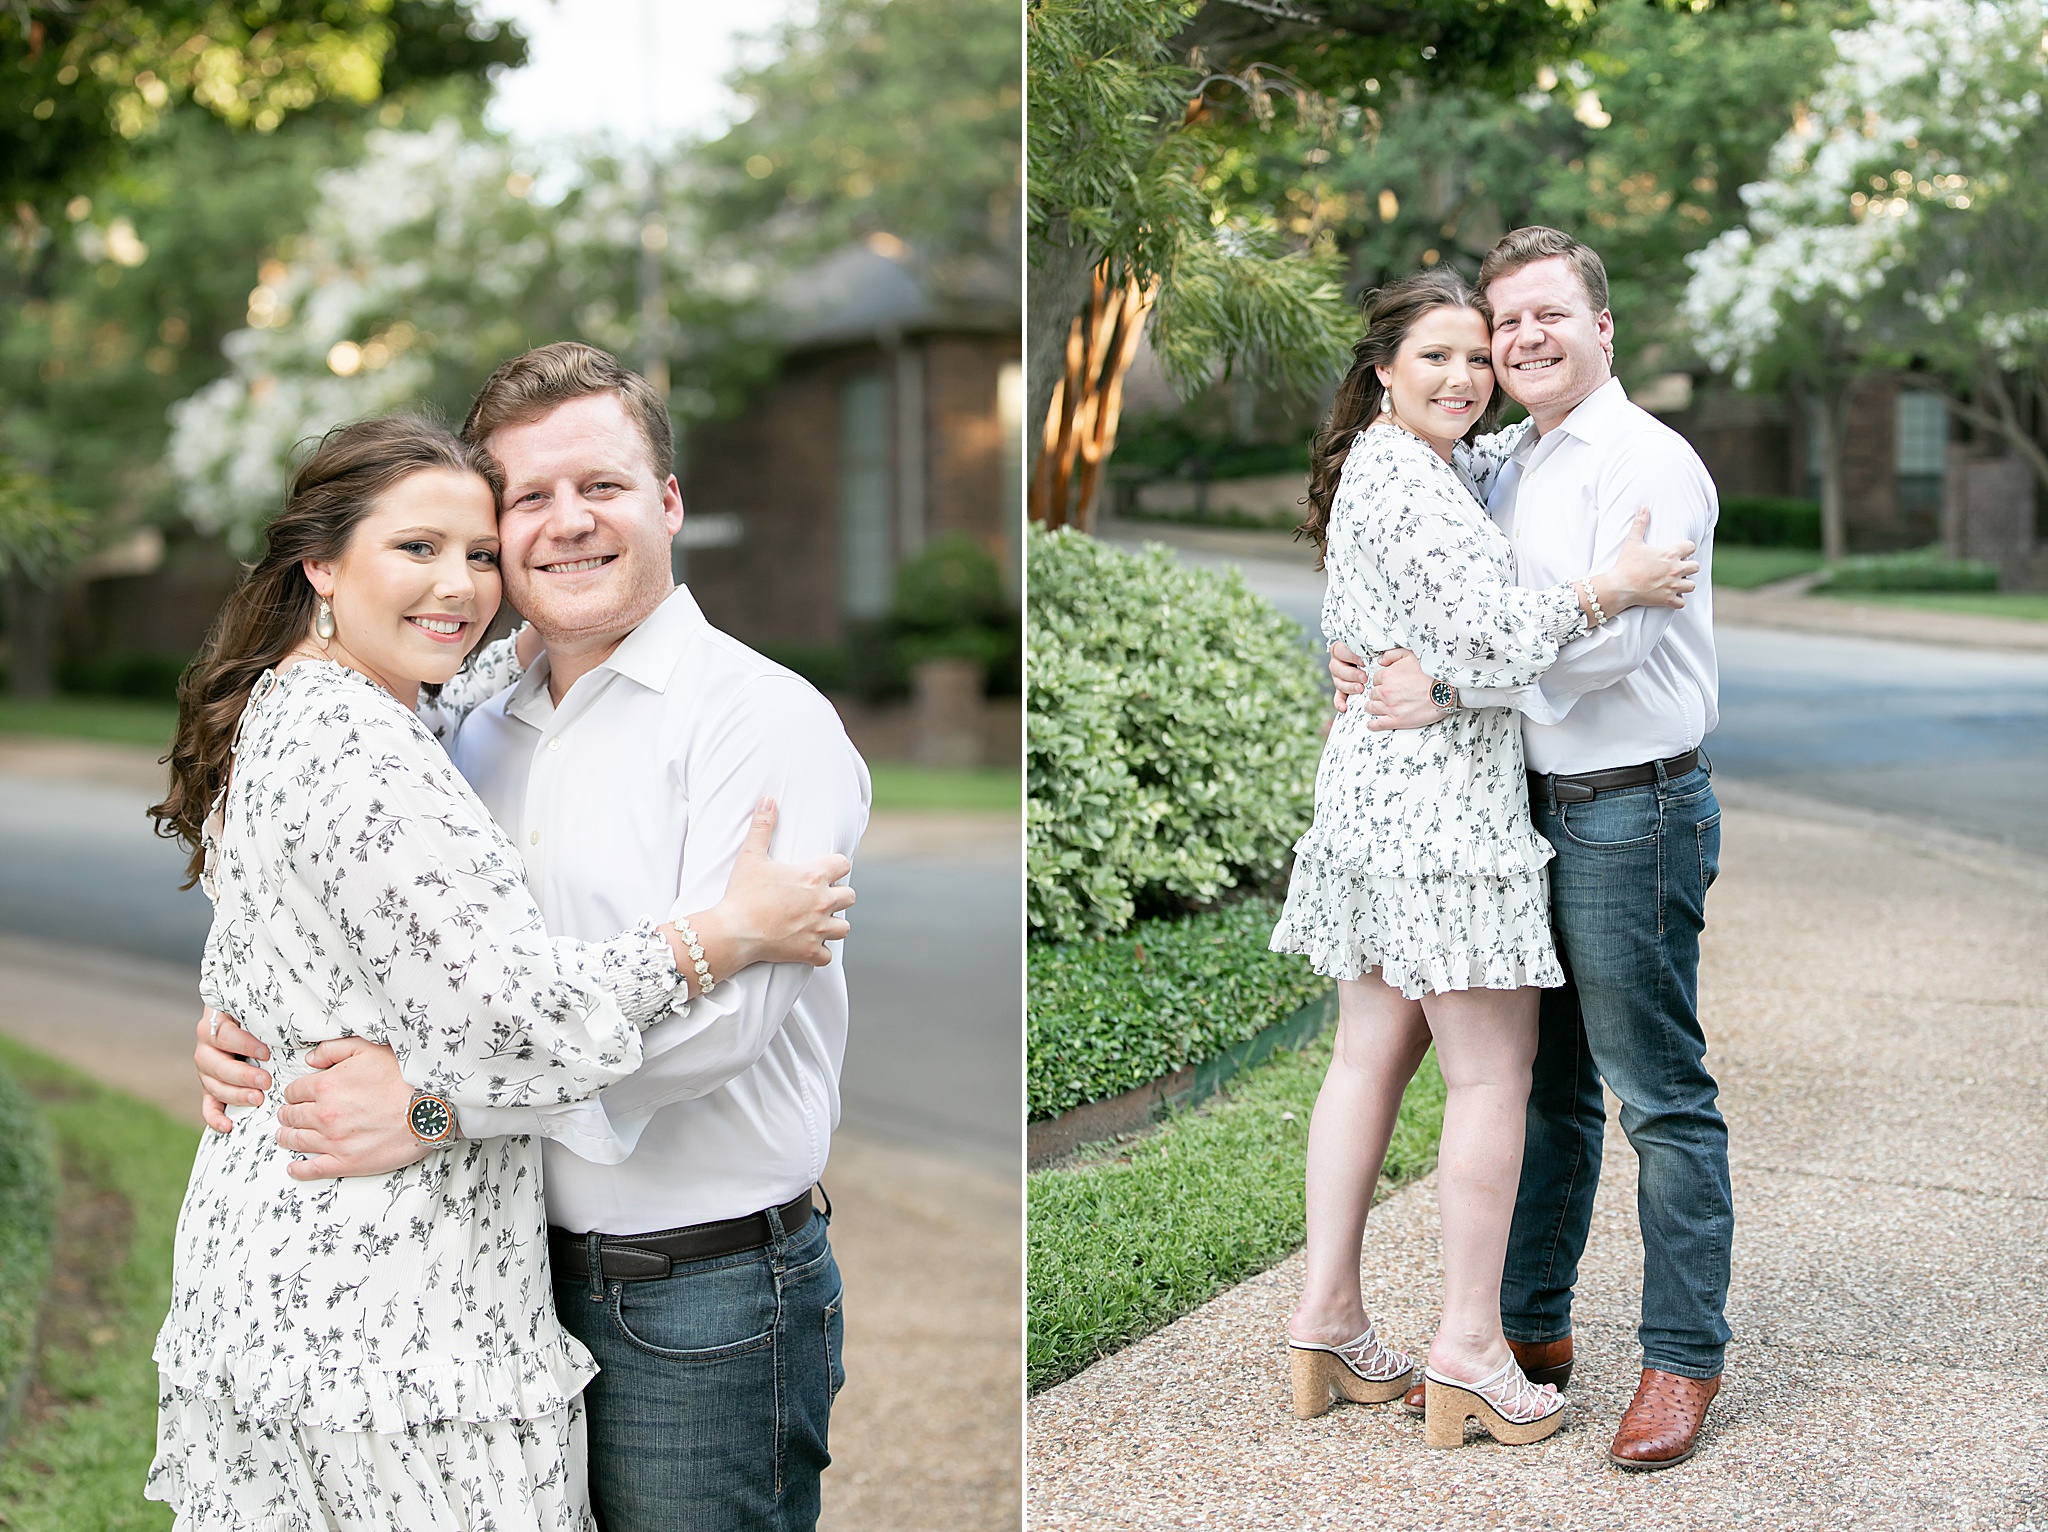 engagement session photographed by TX wedding photographer Randi Michelle Cinema + Video